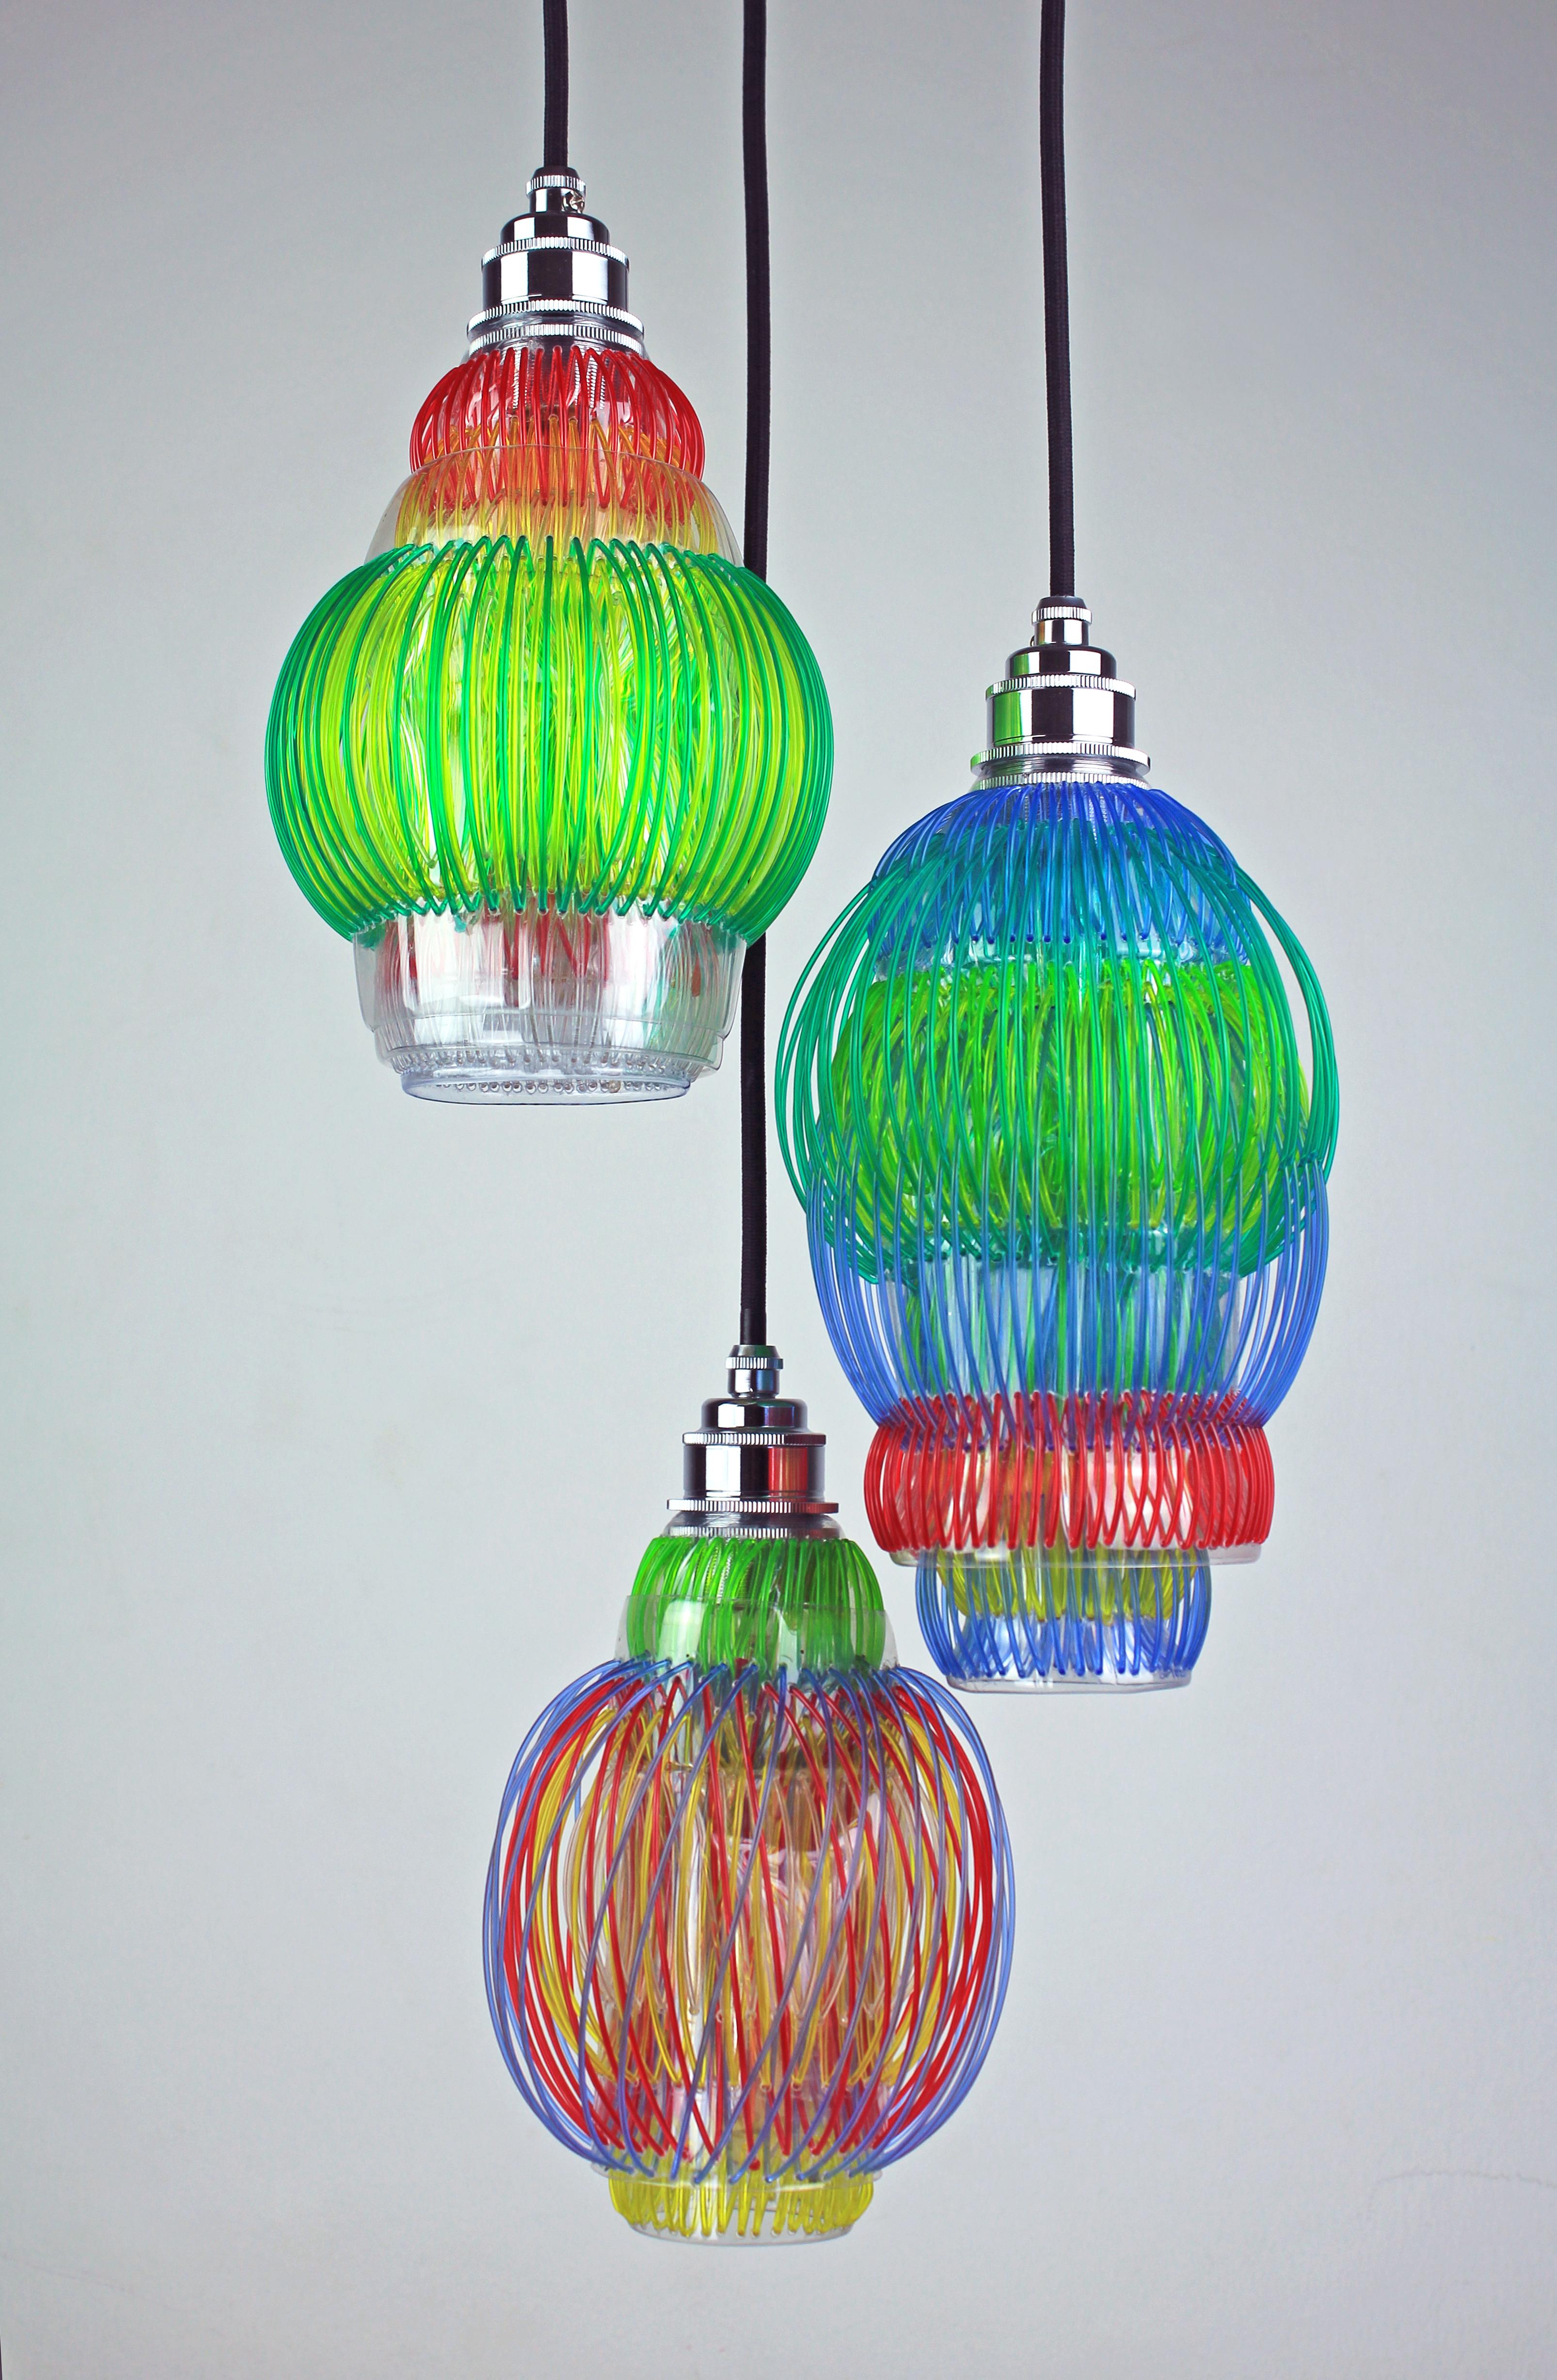 Set of 3 Lluvia pendant lamps by Anabella Georgi
Dimensions: 
Lamp 1: Diameter 30 x Height 14 cm 
Lamp 2: Diameter 26 x Height 14 cm 
Lamp 3: 25 x H 15 cm 
Materials: Recyclable Pet plastic bottles woven with rPET filament for 3D printers, Led